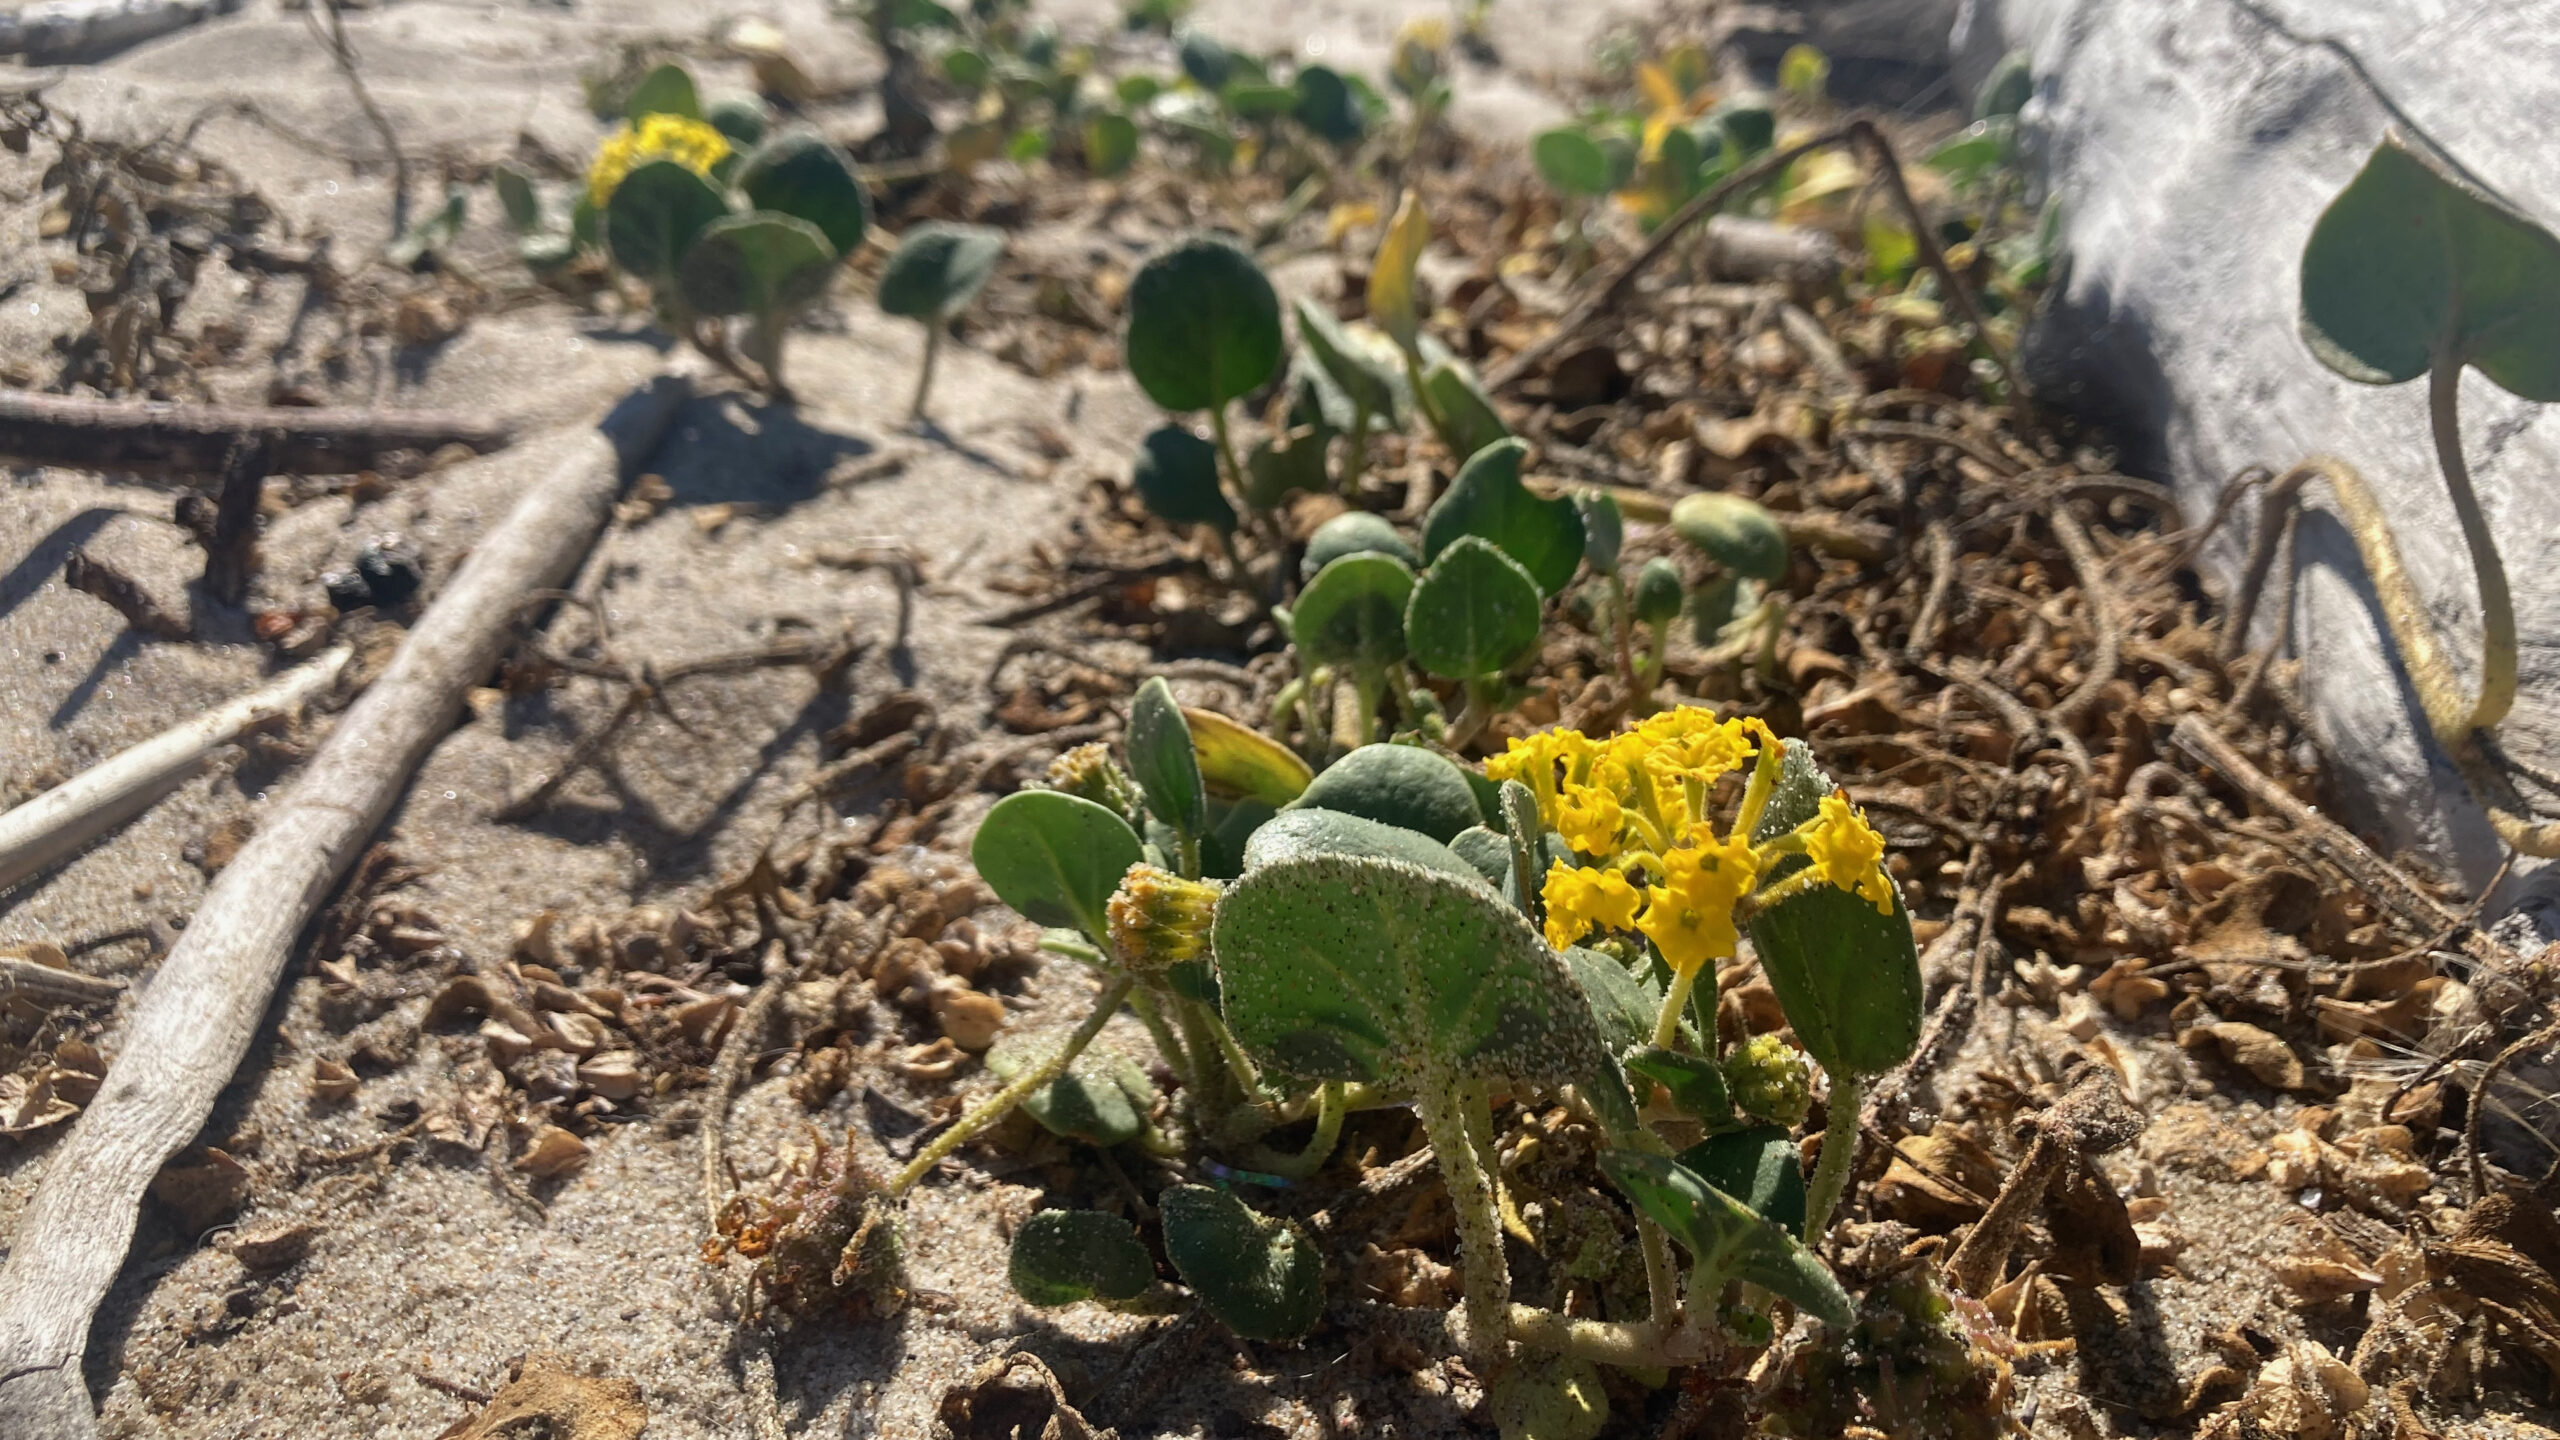 A close up picture of yellow sand verbena, a small creeping plant, next to a log on sand. The plant has a flowering head made up of multiple small yellow flowers. It has green, round, fleshy leaves.